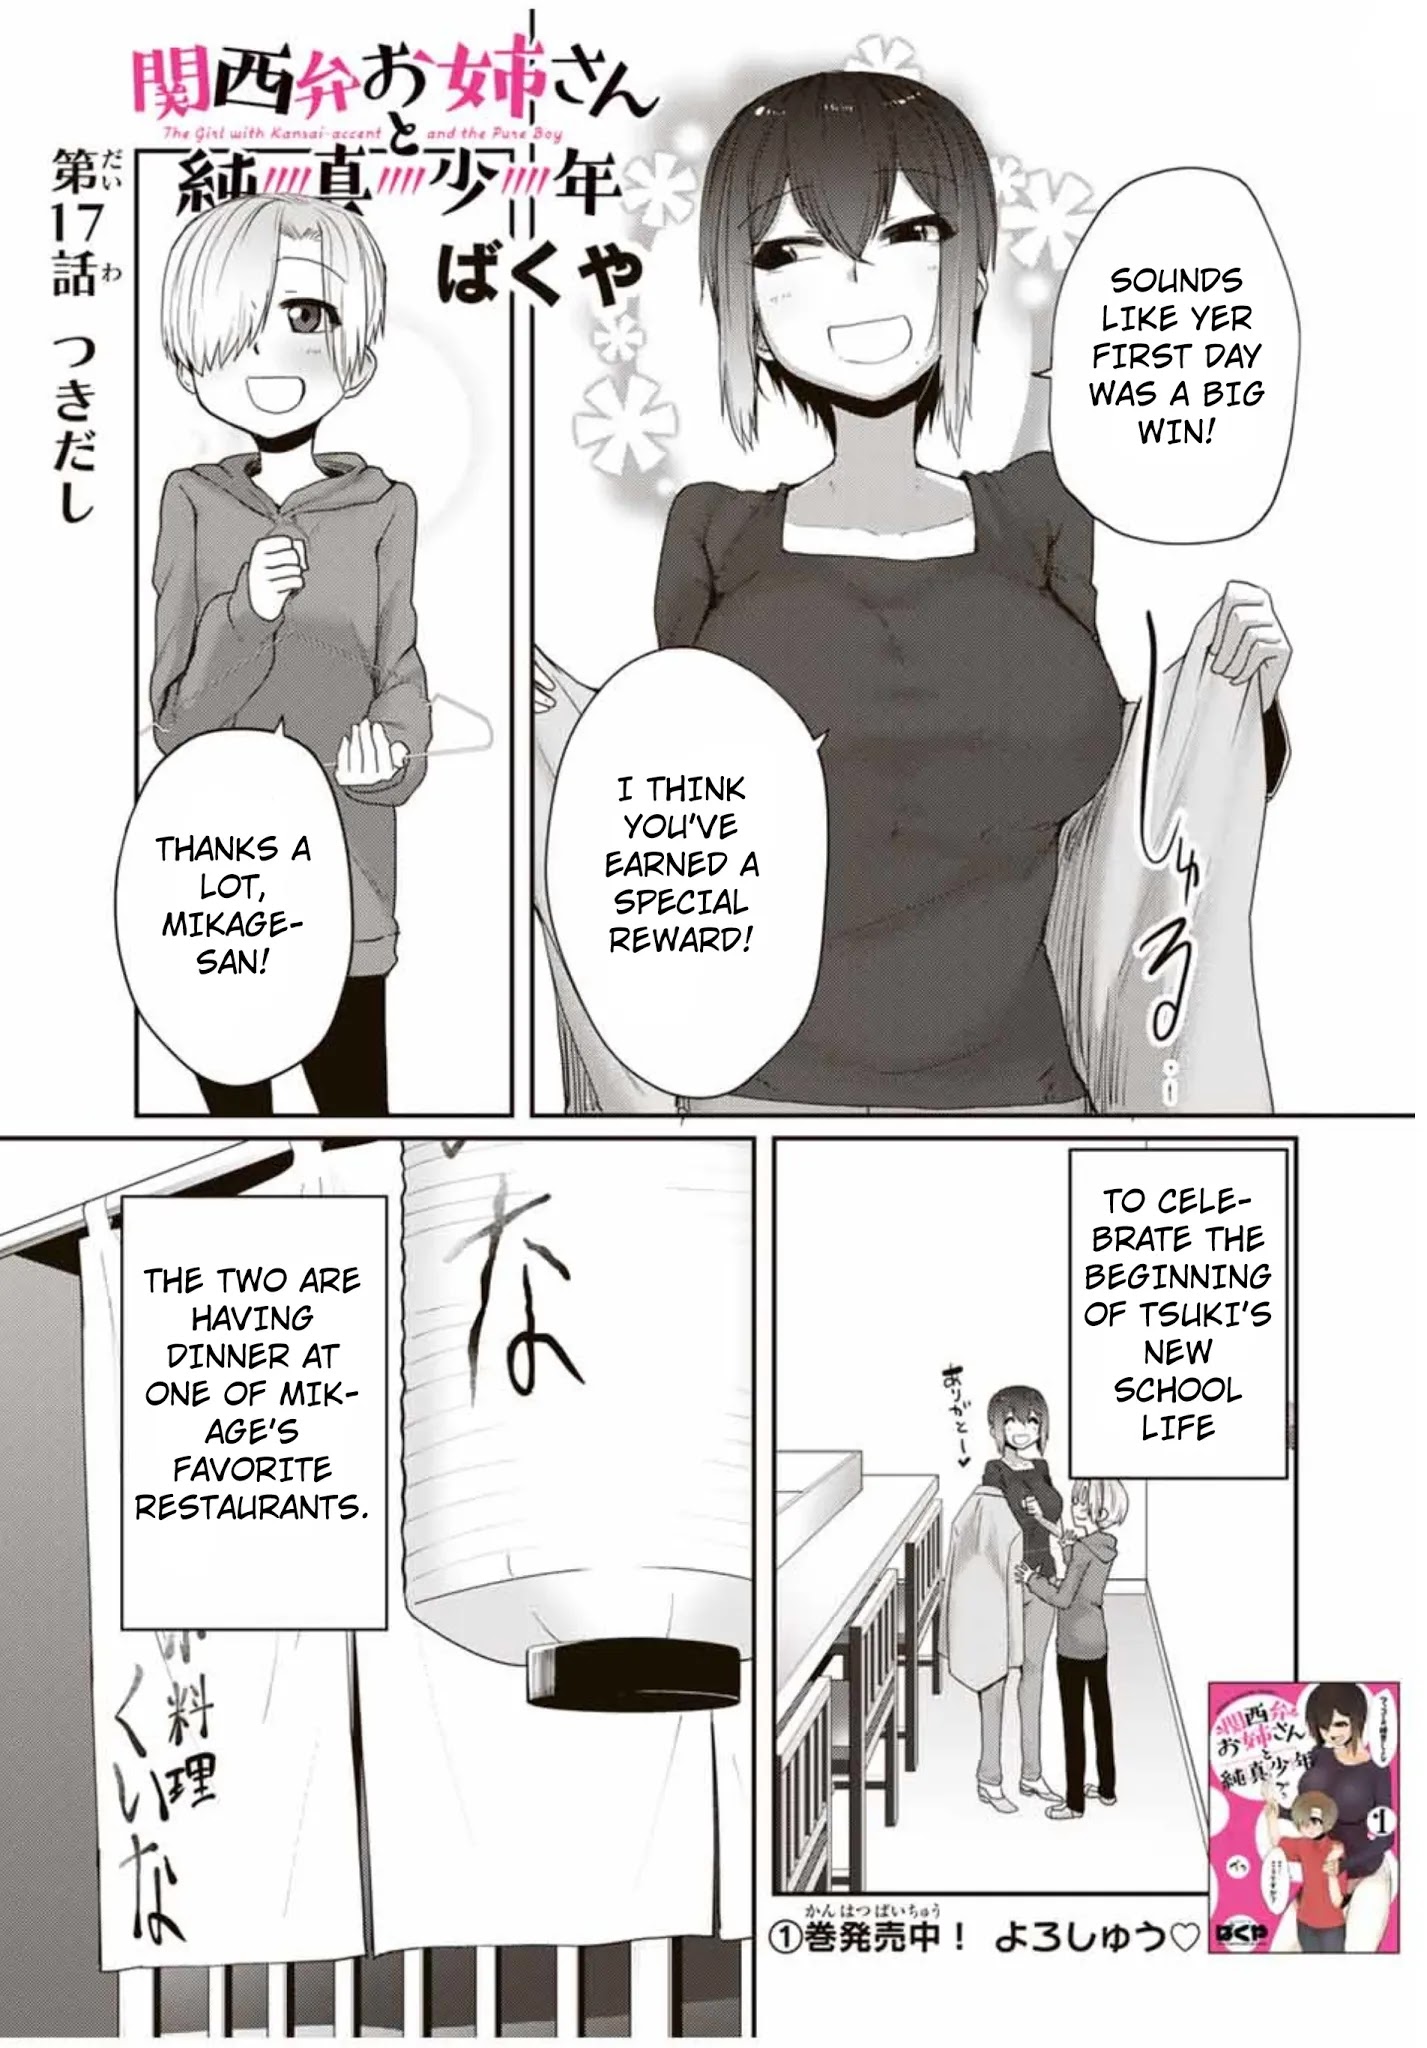 The Girl with a Kansai Accent and the Pure Boy - Chapter 17 Page 1